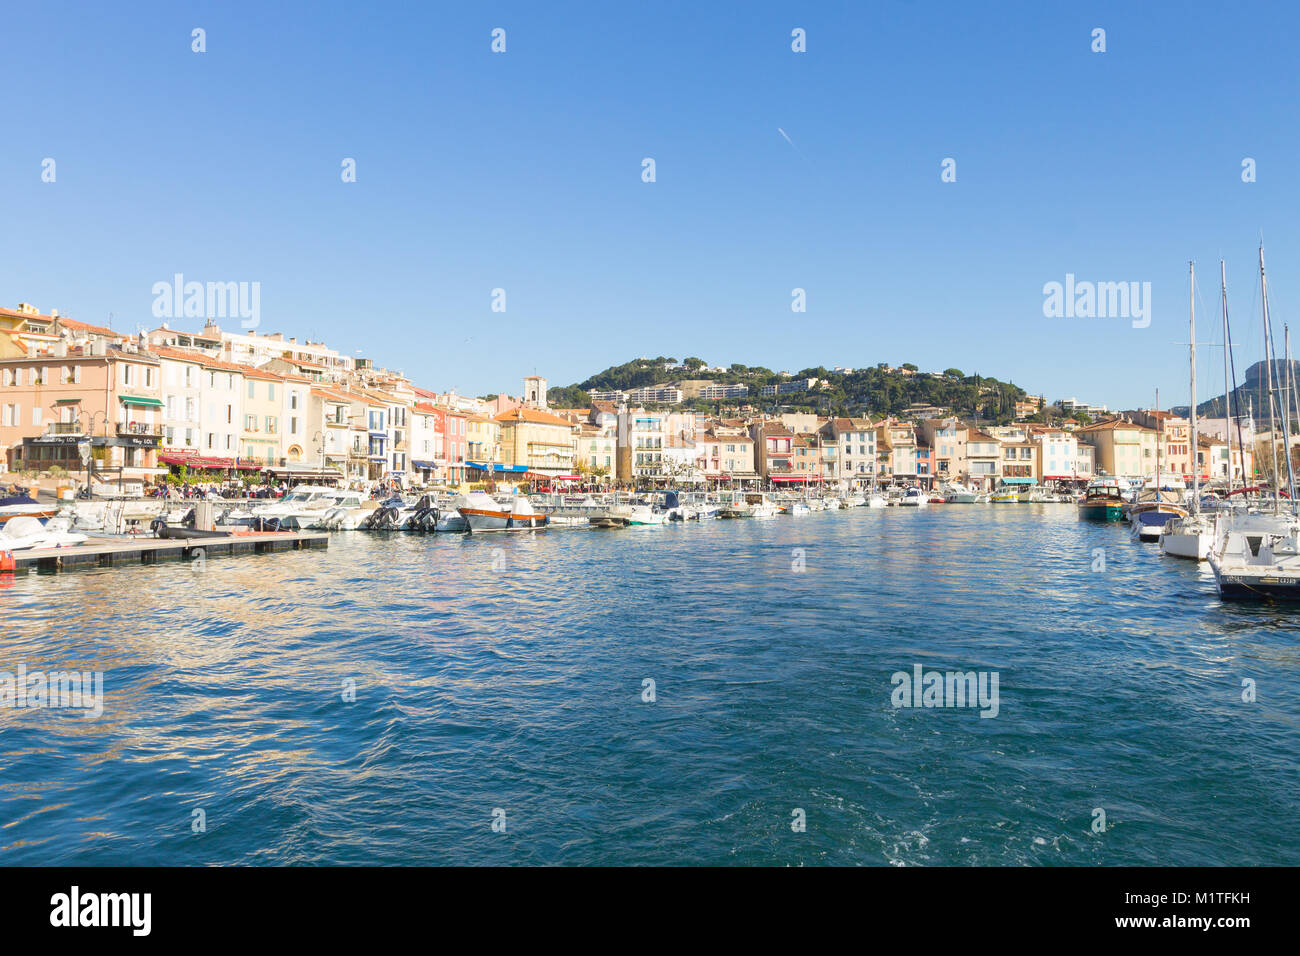 Colorful traditional houses on the promenade in the port of Cassis town, Provence, France Stock Photo